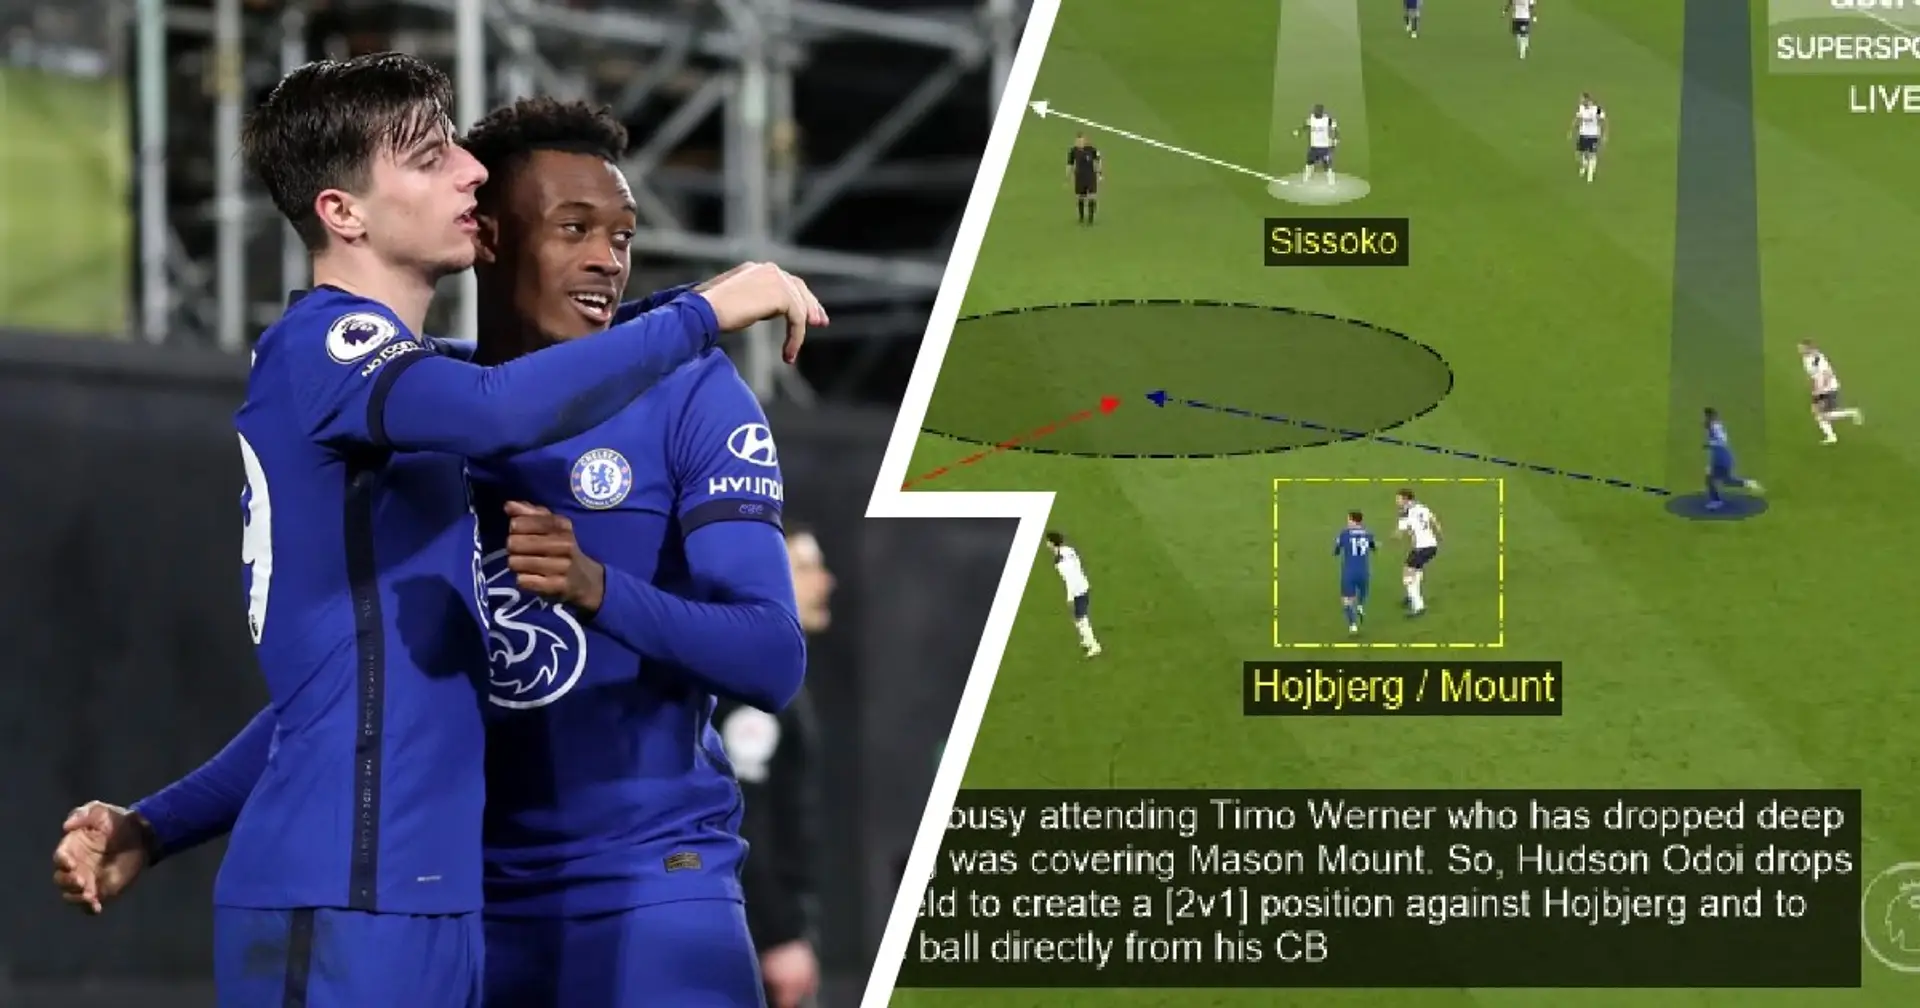 How Chelsea brilliantly using central areas to create attacks - explained by fan